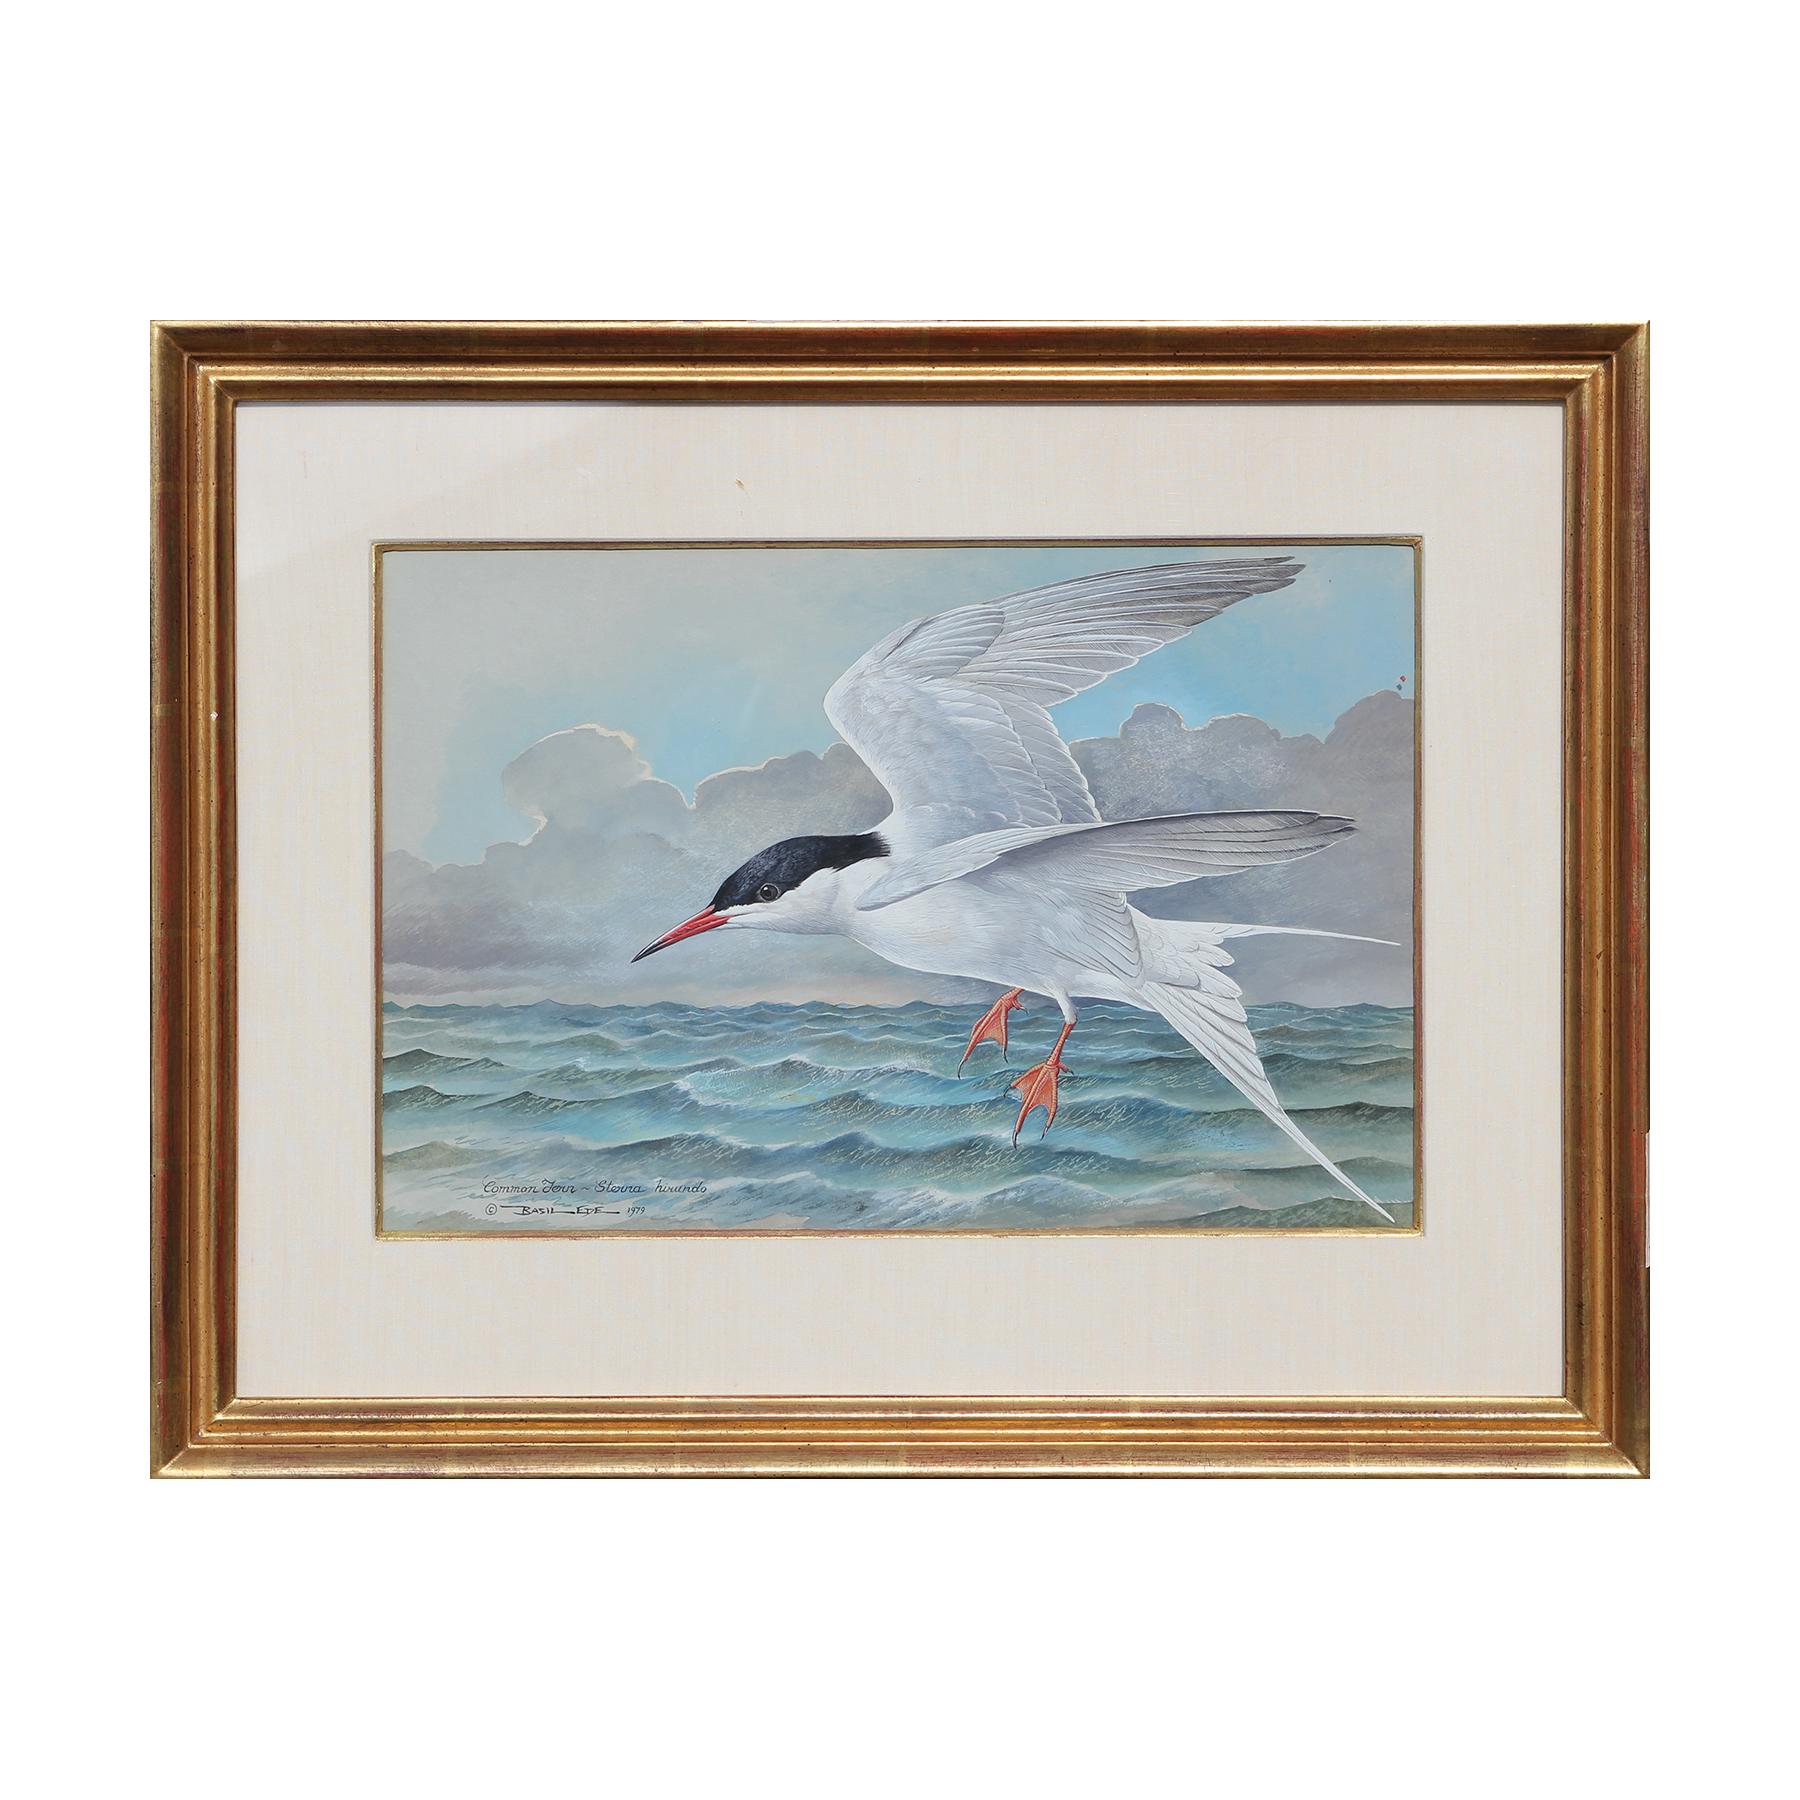 Basil Ede Animal Painting - "The Common Tern" Bird Watercolor Painting